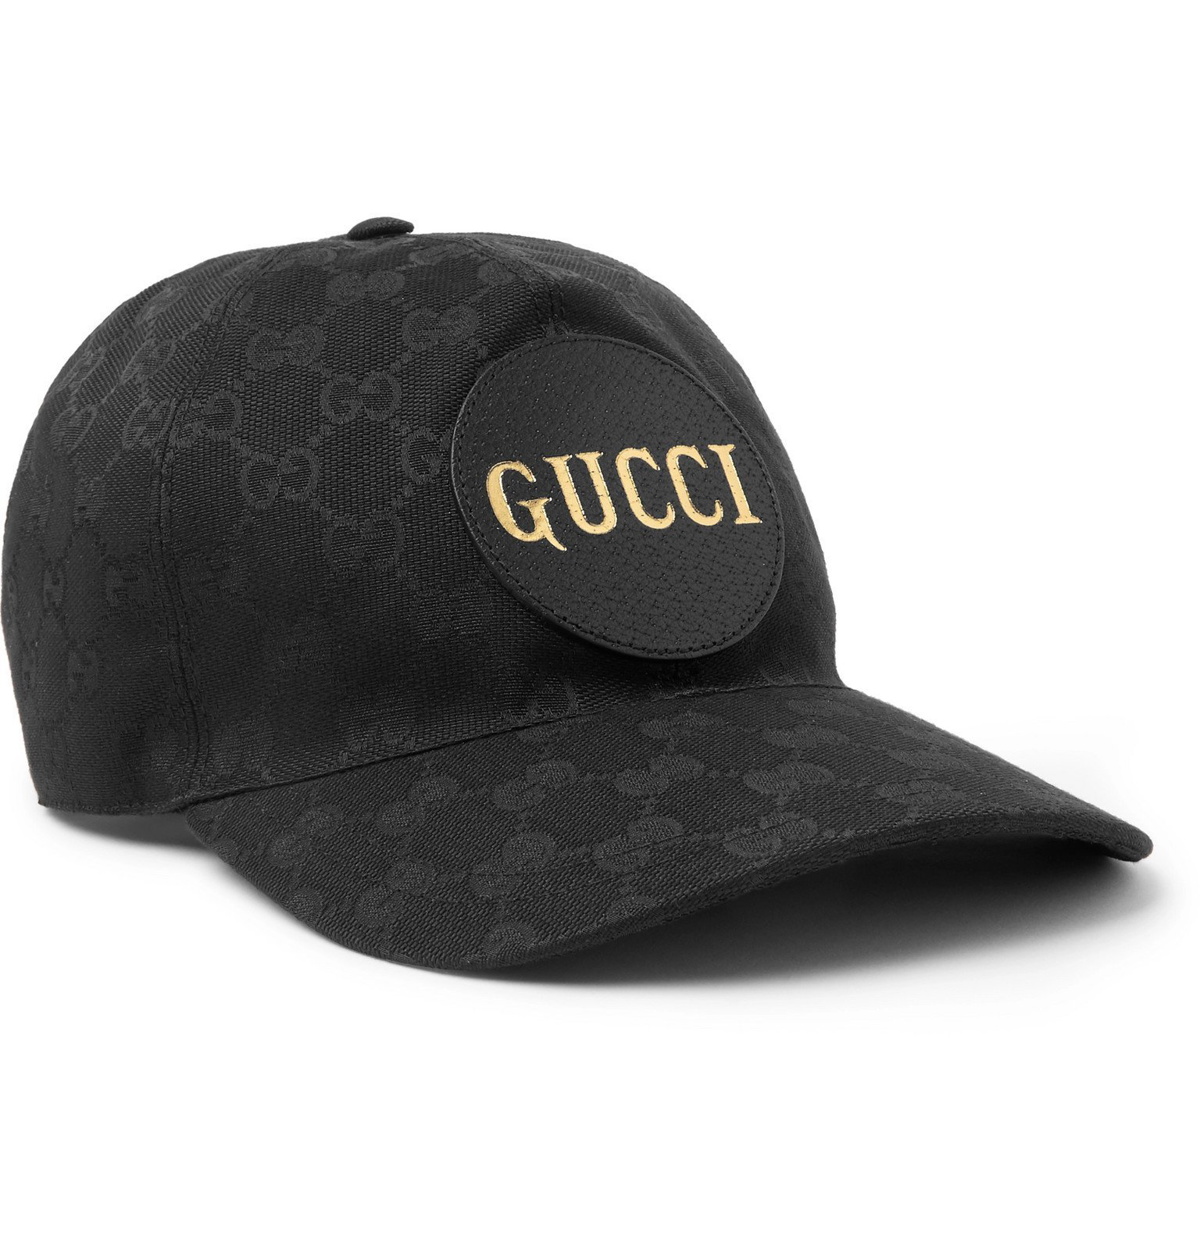 GUCCI Leather-Trimmed Monogrammed Canvas Baseball Cap for Men